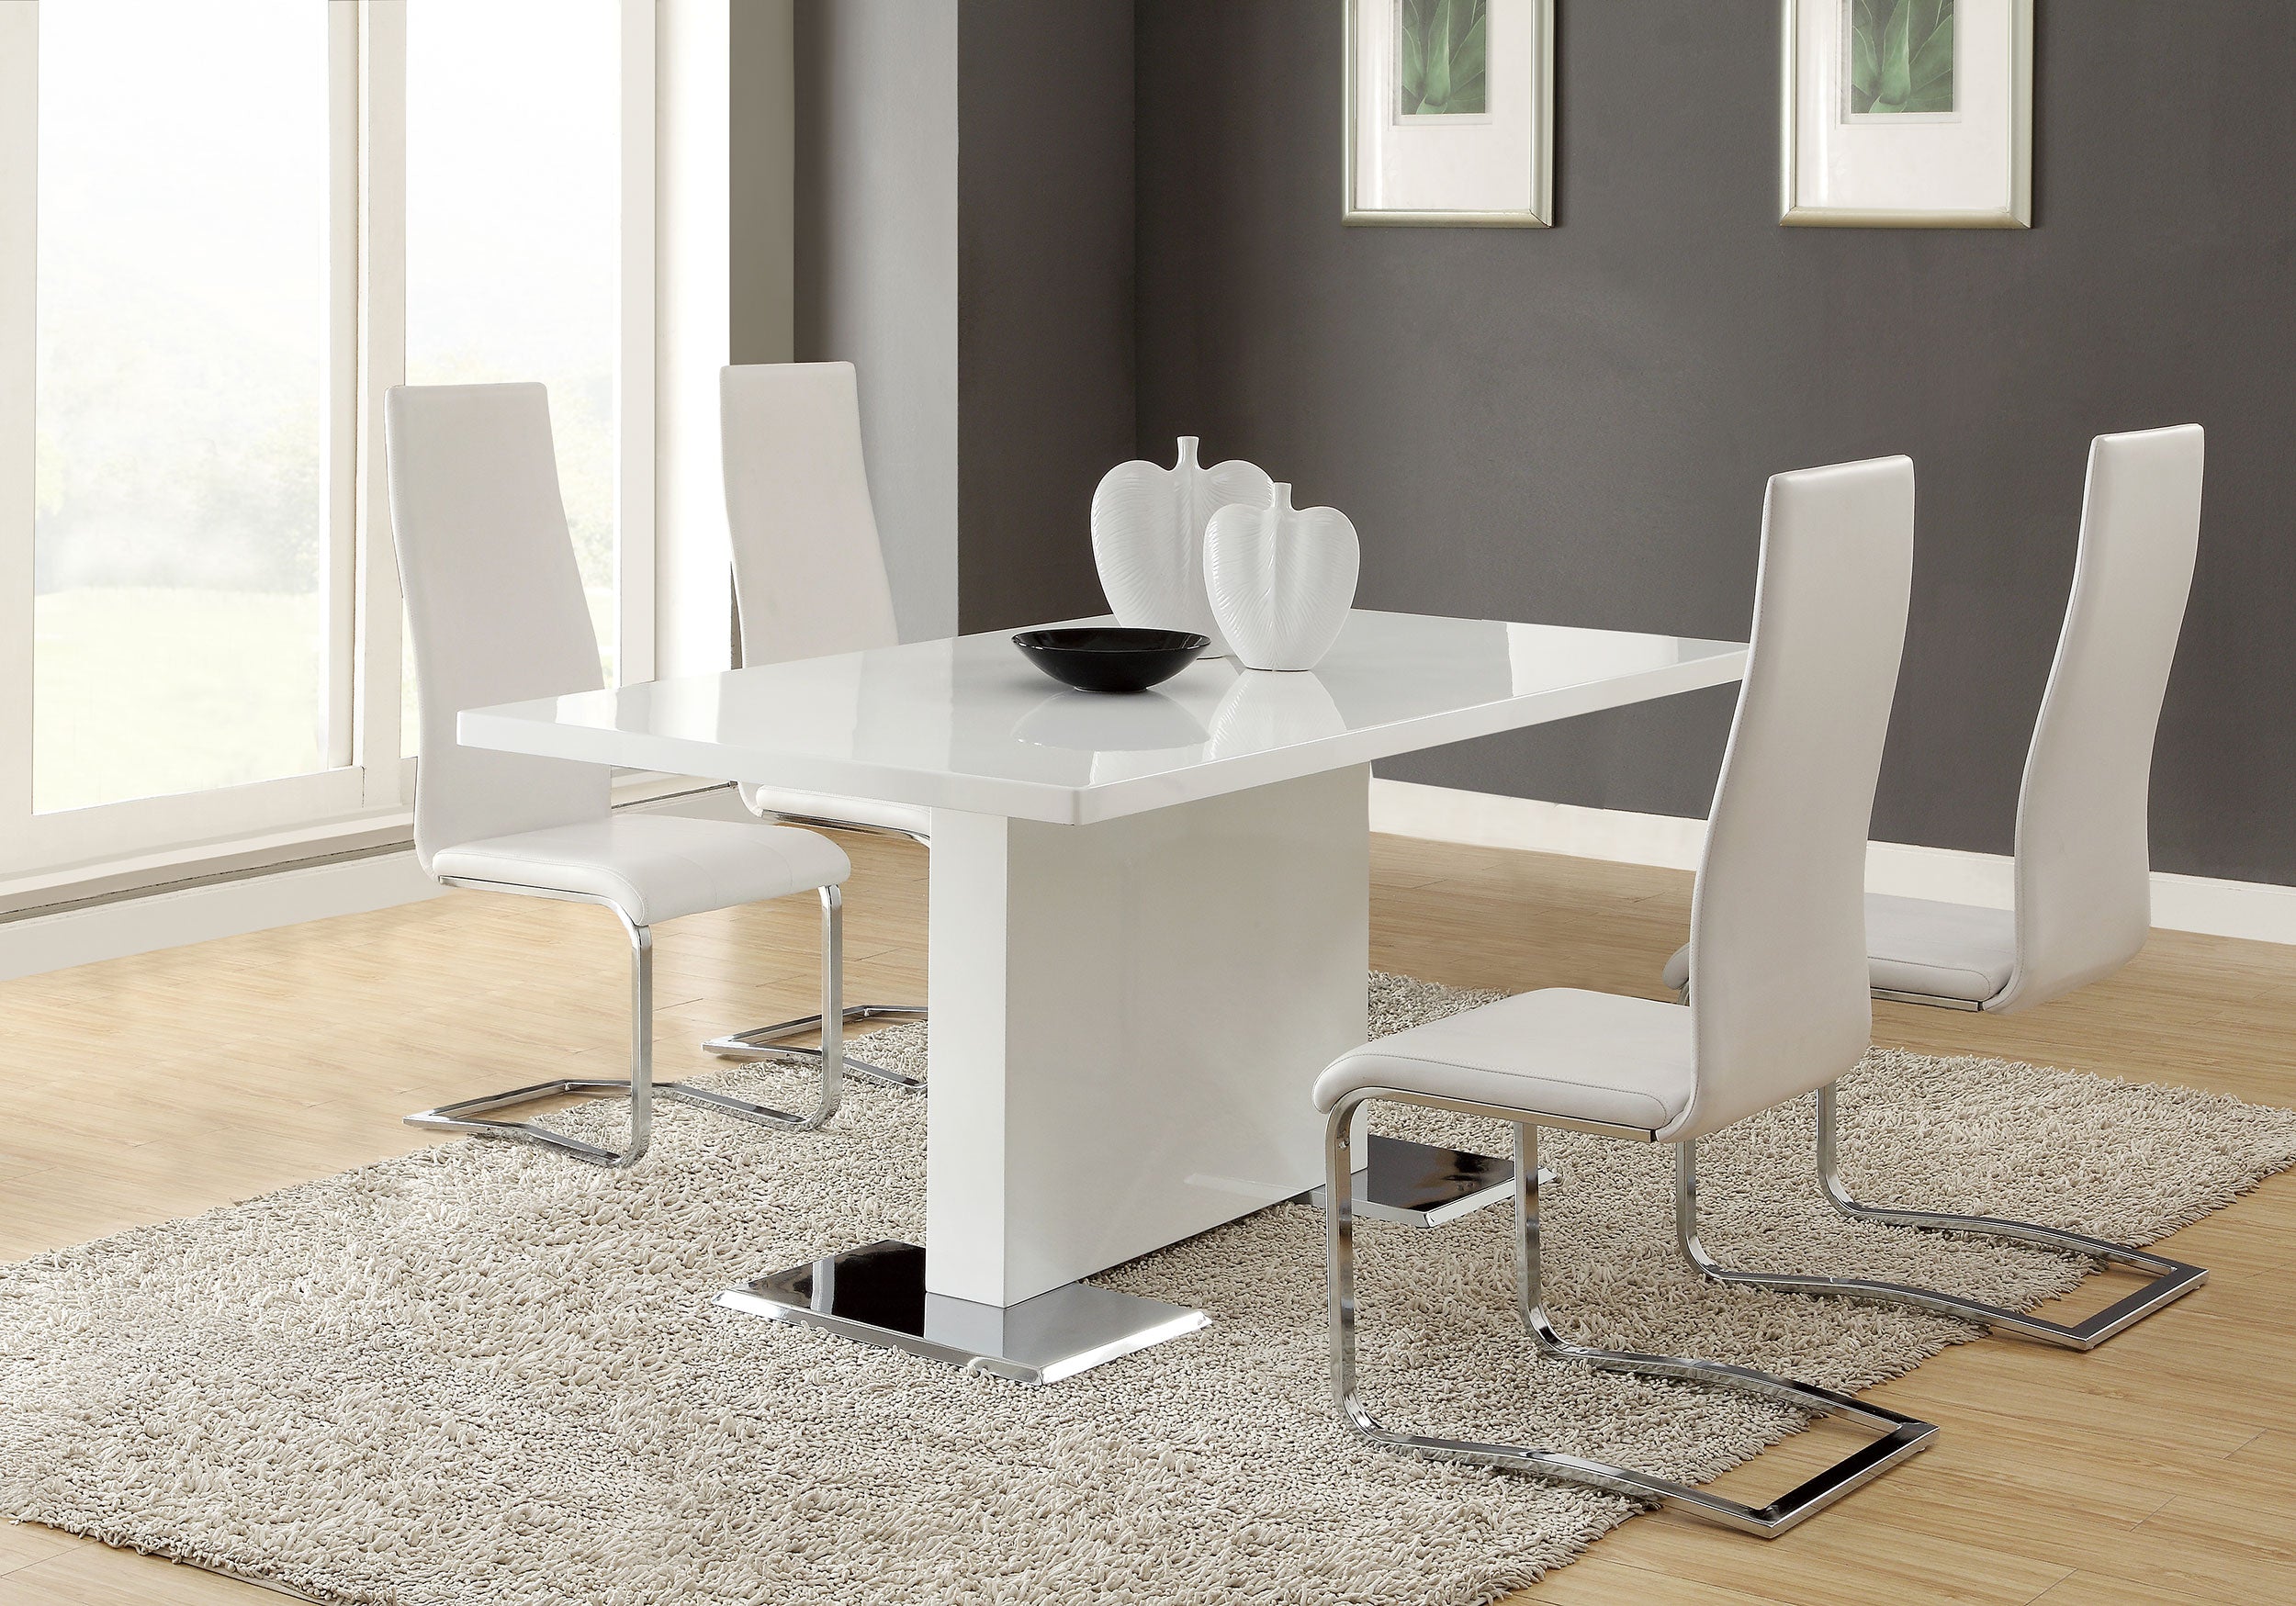 5 PC Contemporary High Gloss White Dining Room Set With Leatheratte Chairs